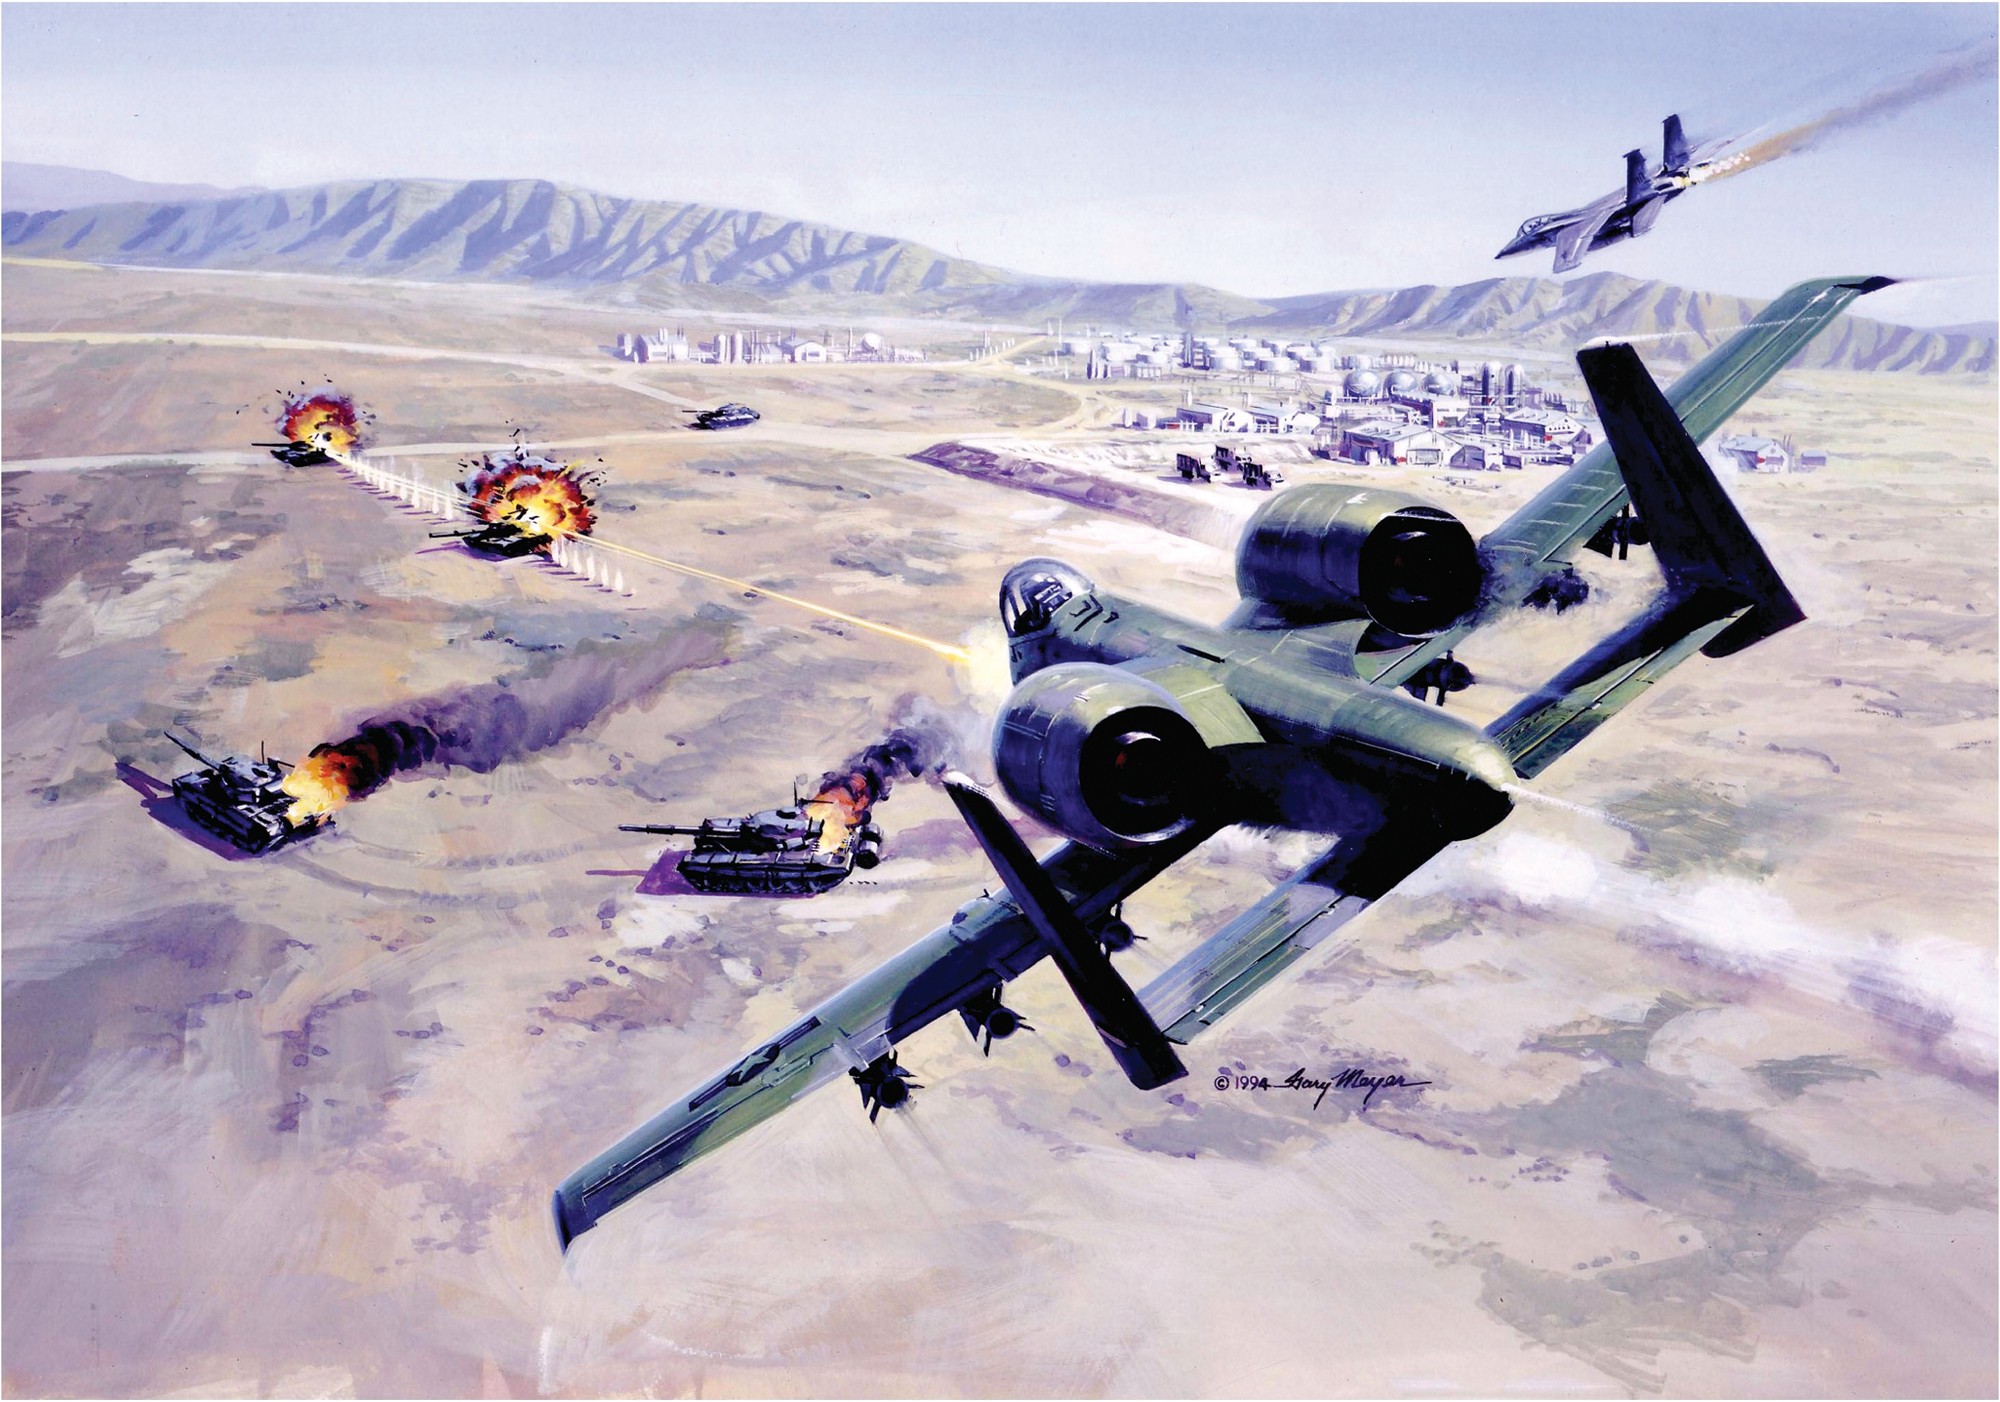 General 2000x1402 aircraft war battle air force artwork tank military vehicle military aircraft explosion landscape 1994 (Year) US Air Force F-15 Eagle Fairchild Republic A-10 Thunderbolt II Tankbuster Attacker jets American aircraft military burning fire McDonnell Douglas